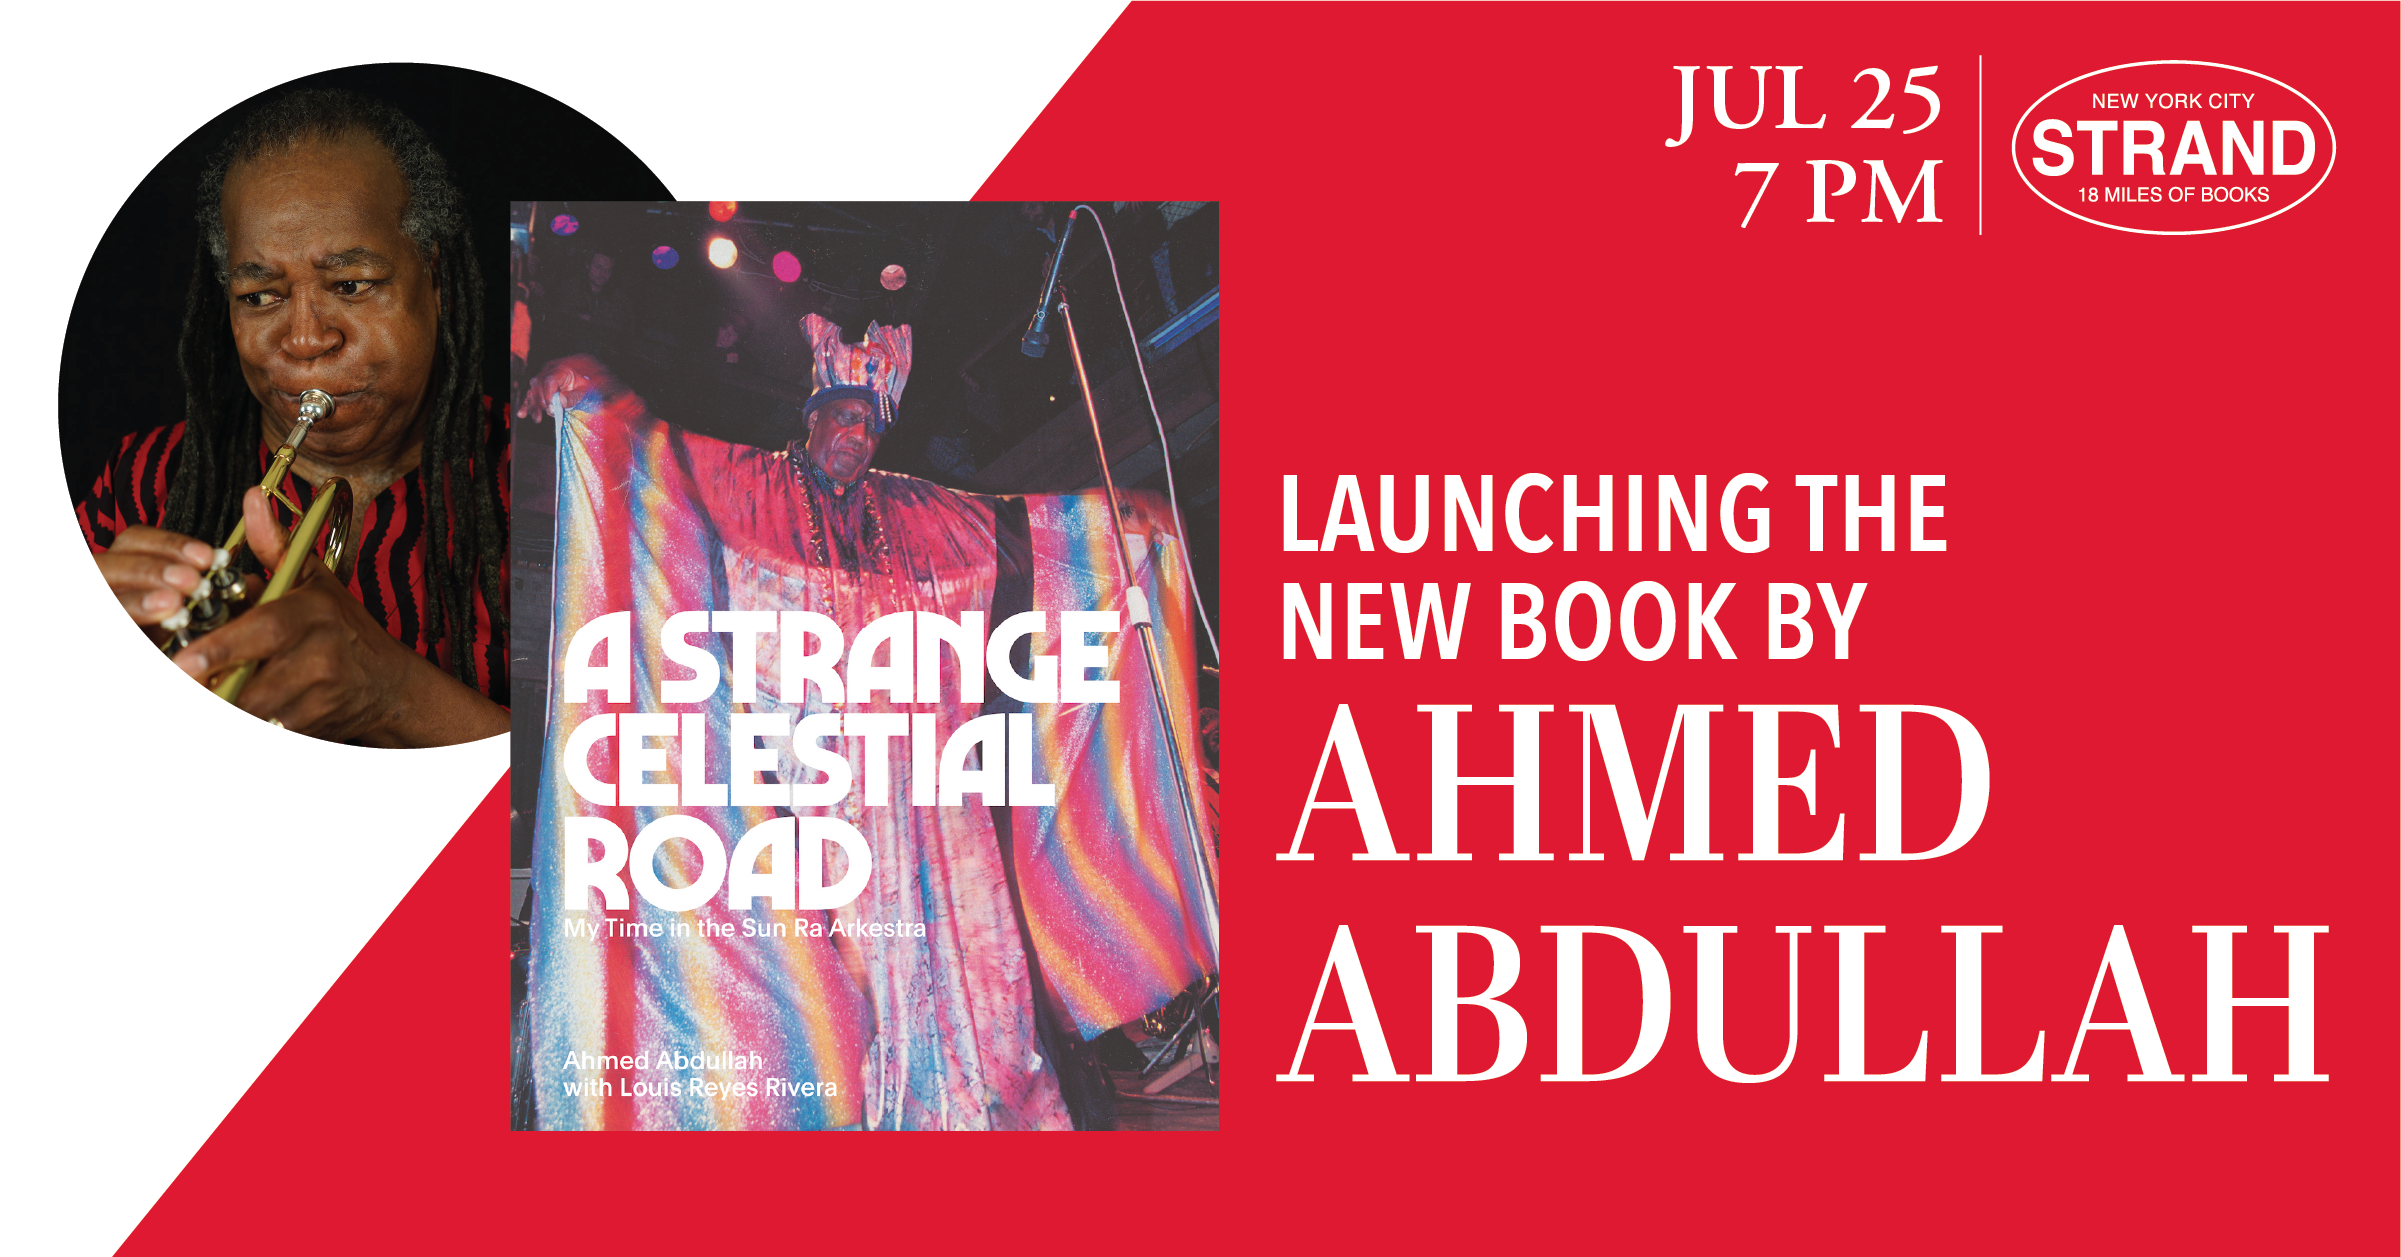 Poster for Ahmed Abdullah at The Strand, July 25th at 7 pm. 